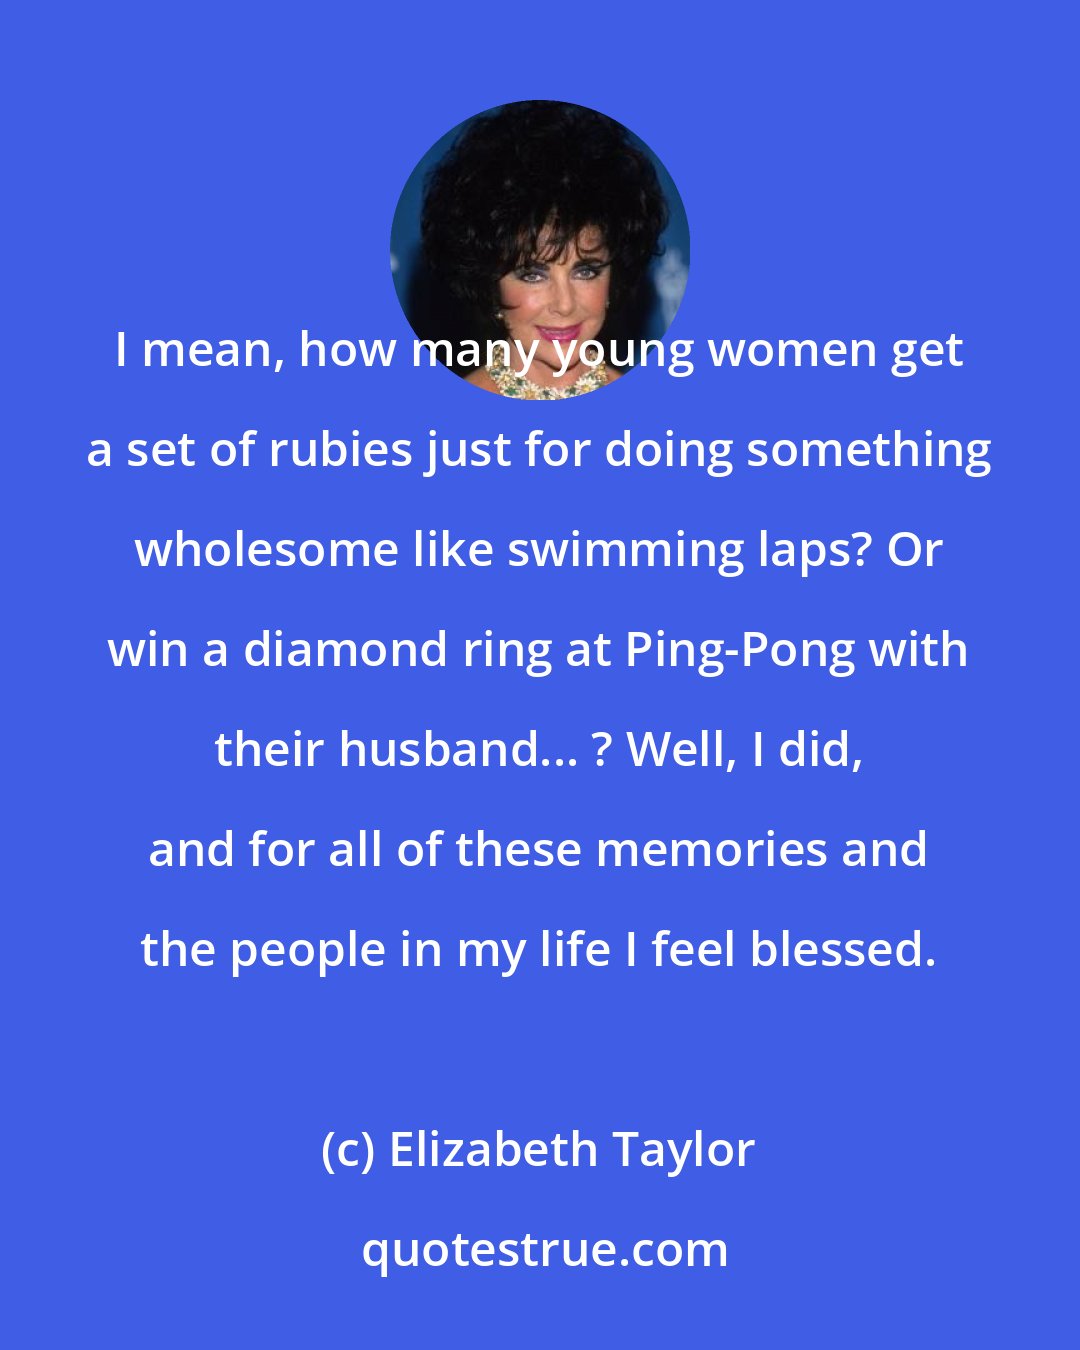 Elizabeth Taylor: I mean, how many young women get a set of rubies just for doing something wholesome like swimming laps? Or win a diamond ring at Ping-Pong with their husband... ? Well, I did, and for all of these memories and the people in my life I feel blessed.